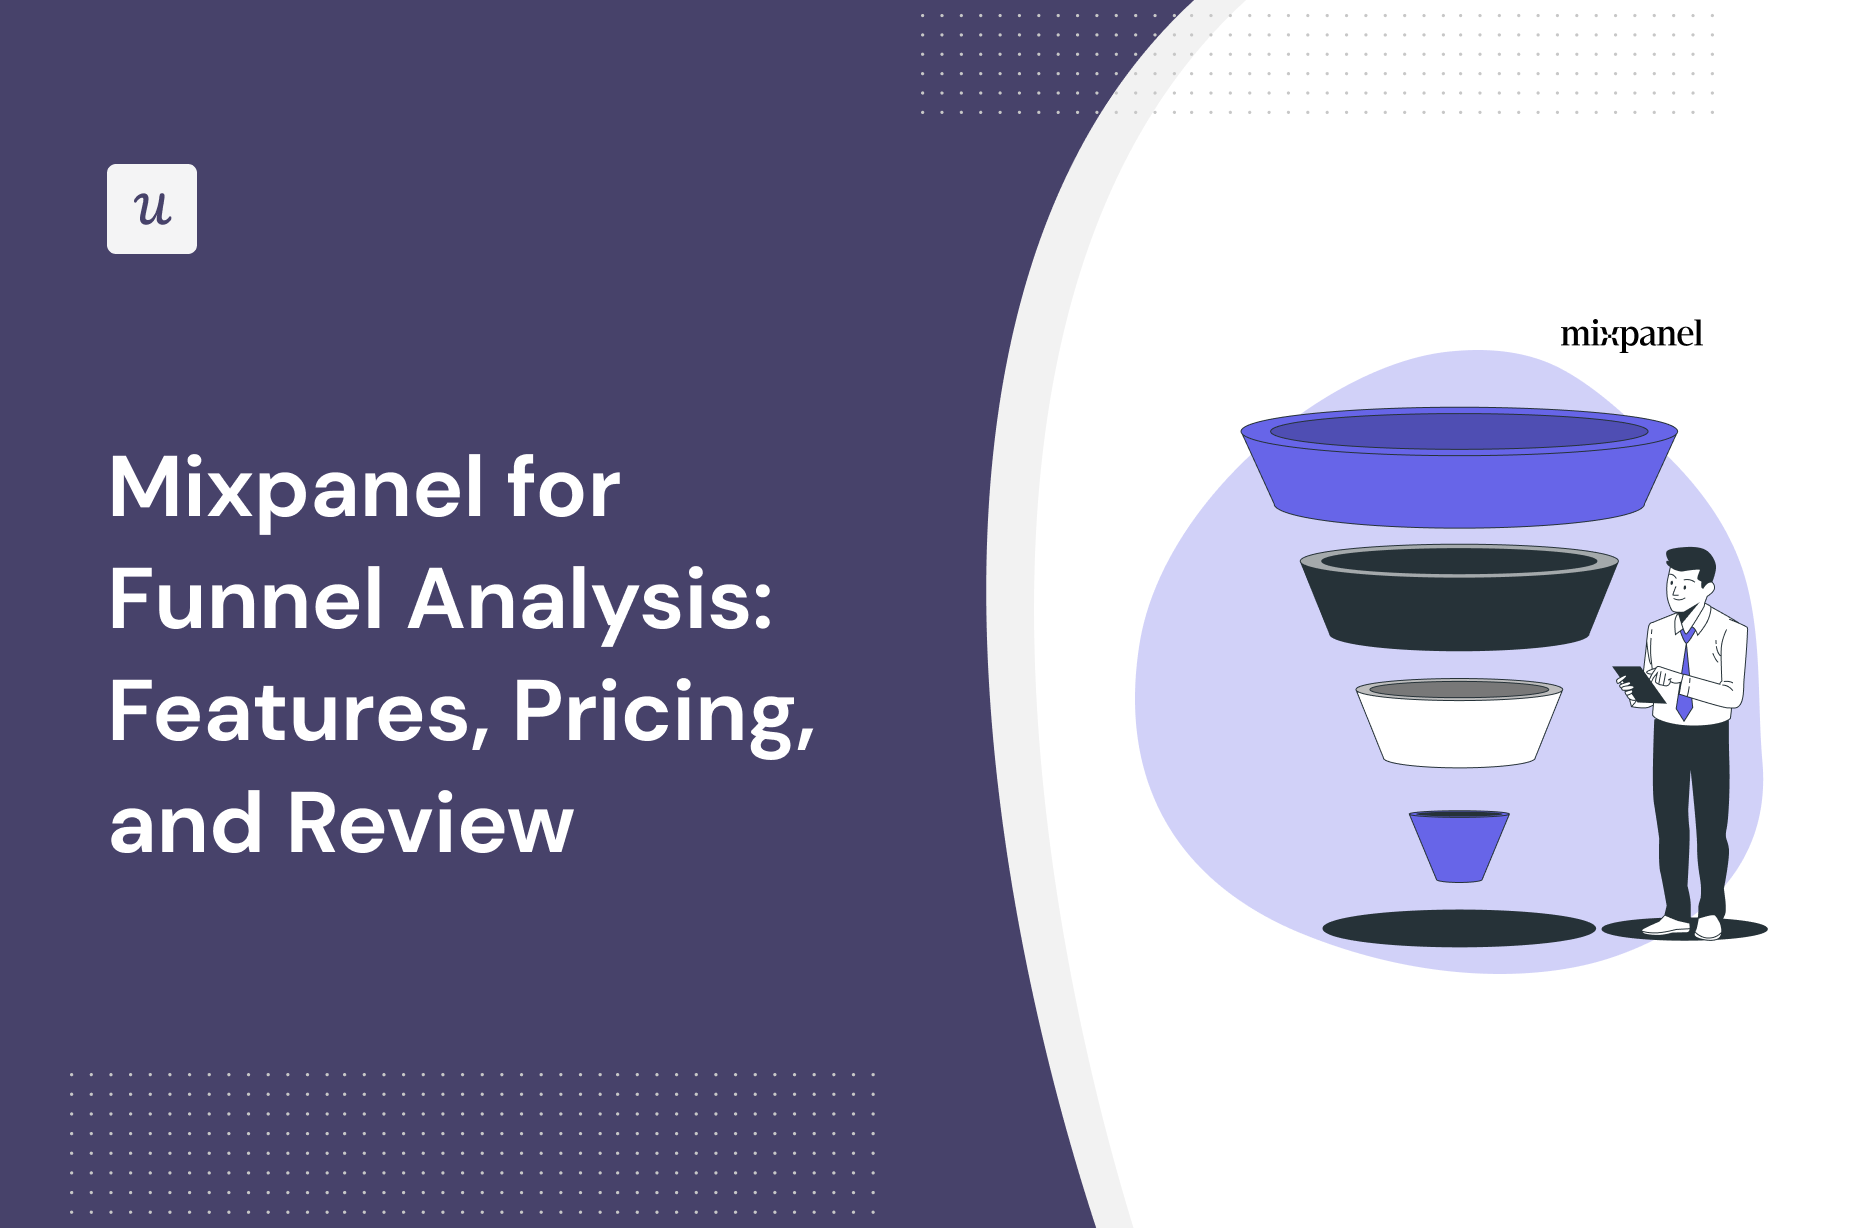 Mixpanel for Funnel Analysis: Features, Pricing, and Review